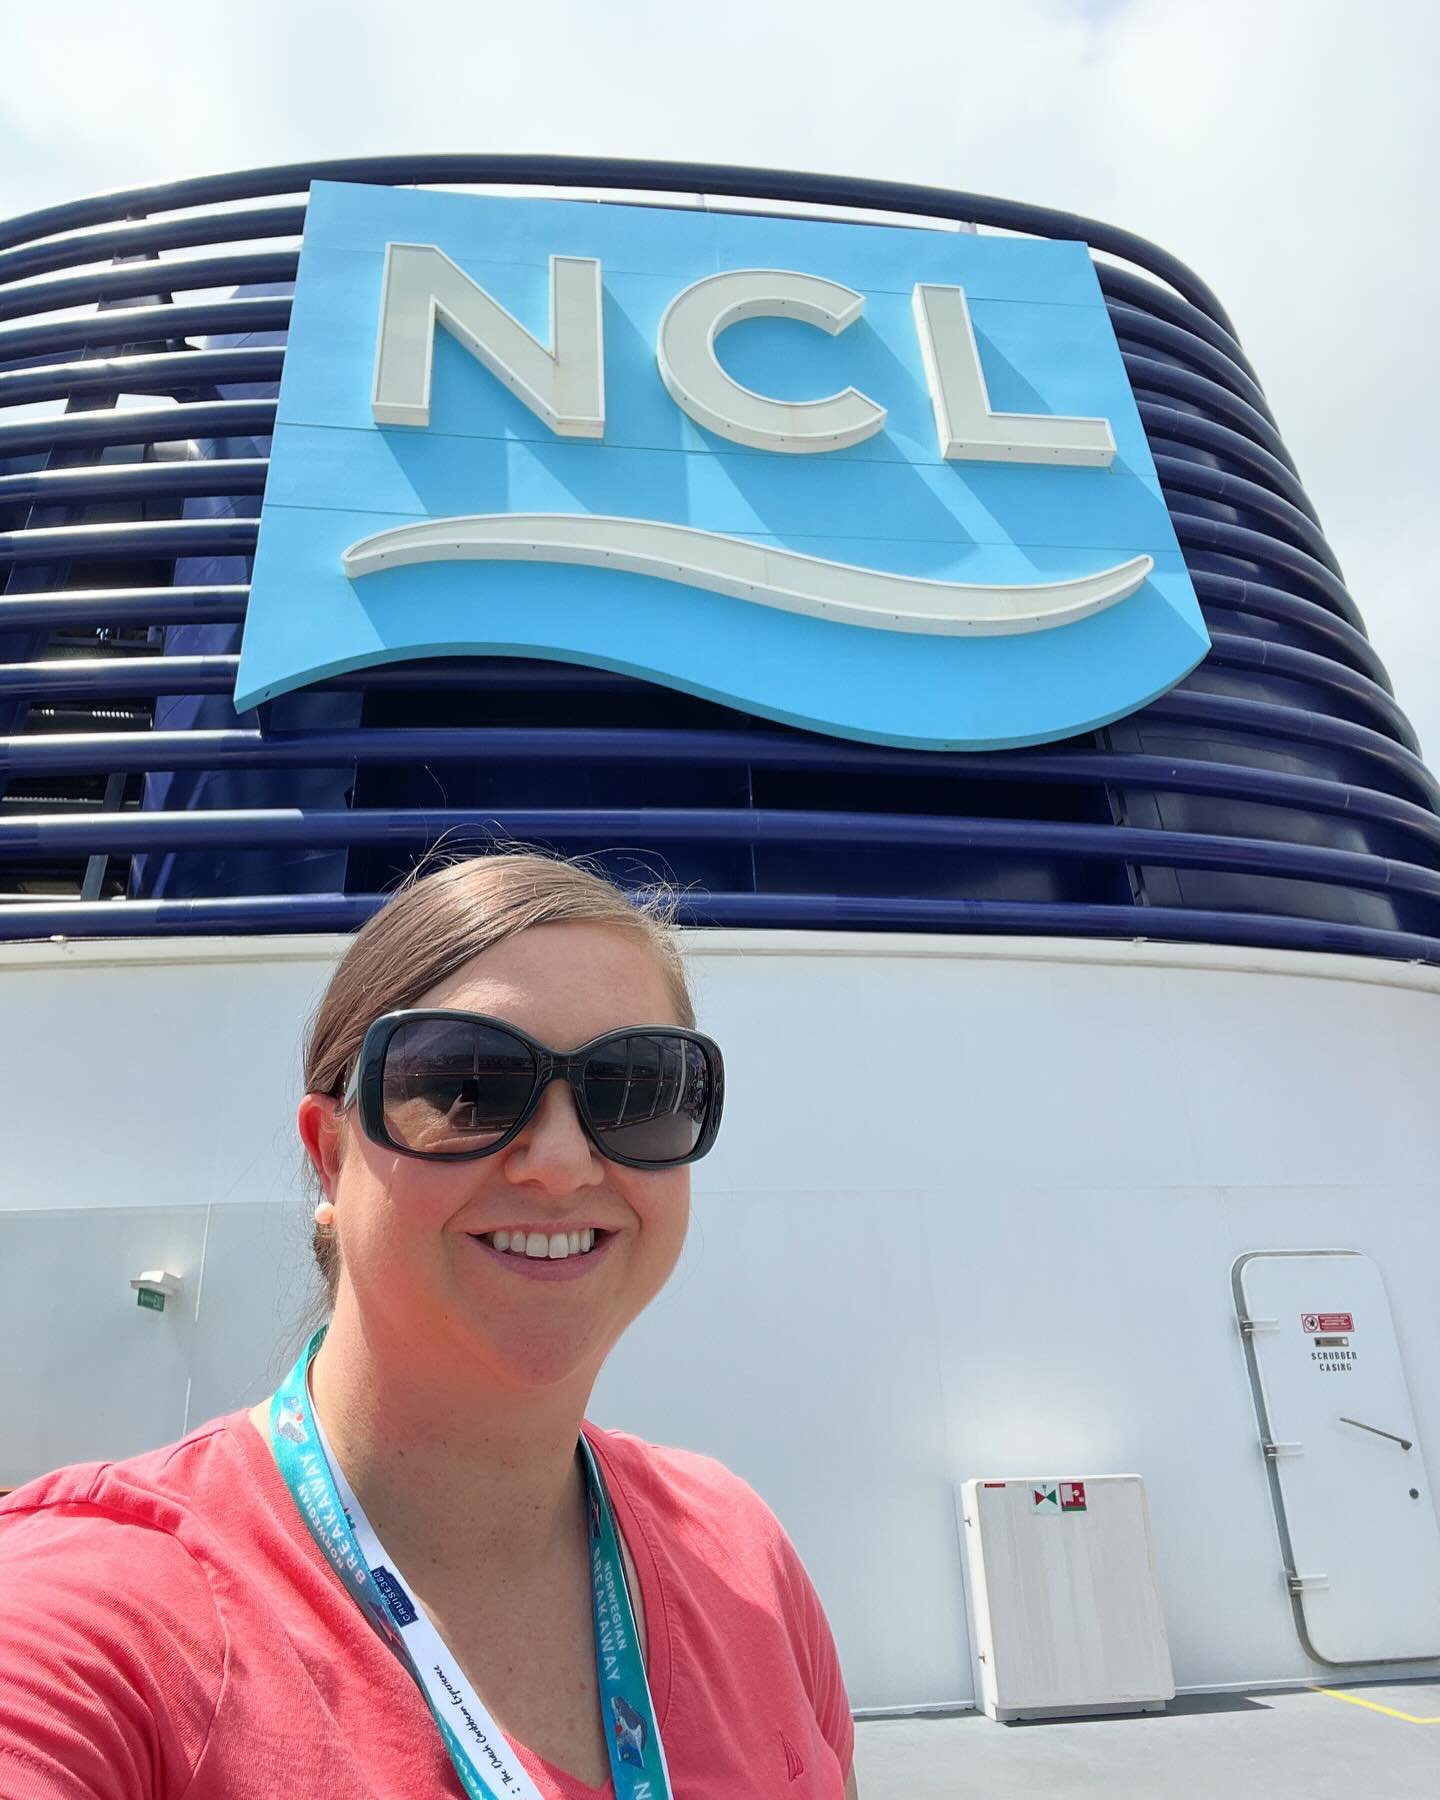 INVITED &bull; Last Sunday, I toured the Norwegian Breakaway for my final ship tour of this year&rsquo;s CLIA Cruise360 (an annual conference for travel advisors). 

Norwegian Breakaway is the first of two Breakaway-class cruise ships. Her maiden voy